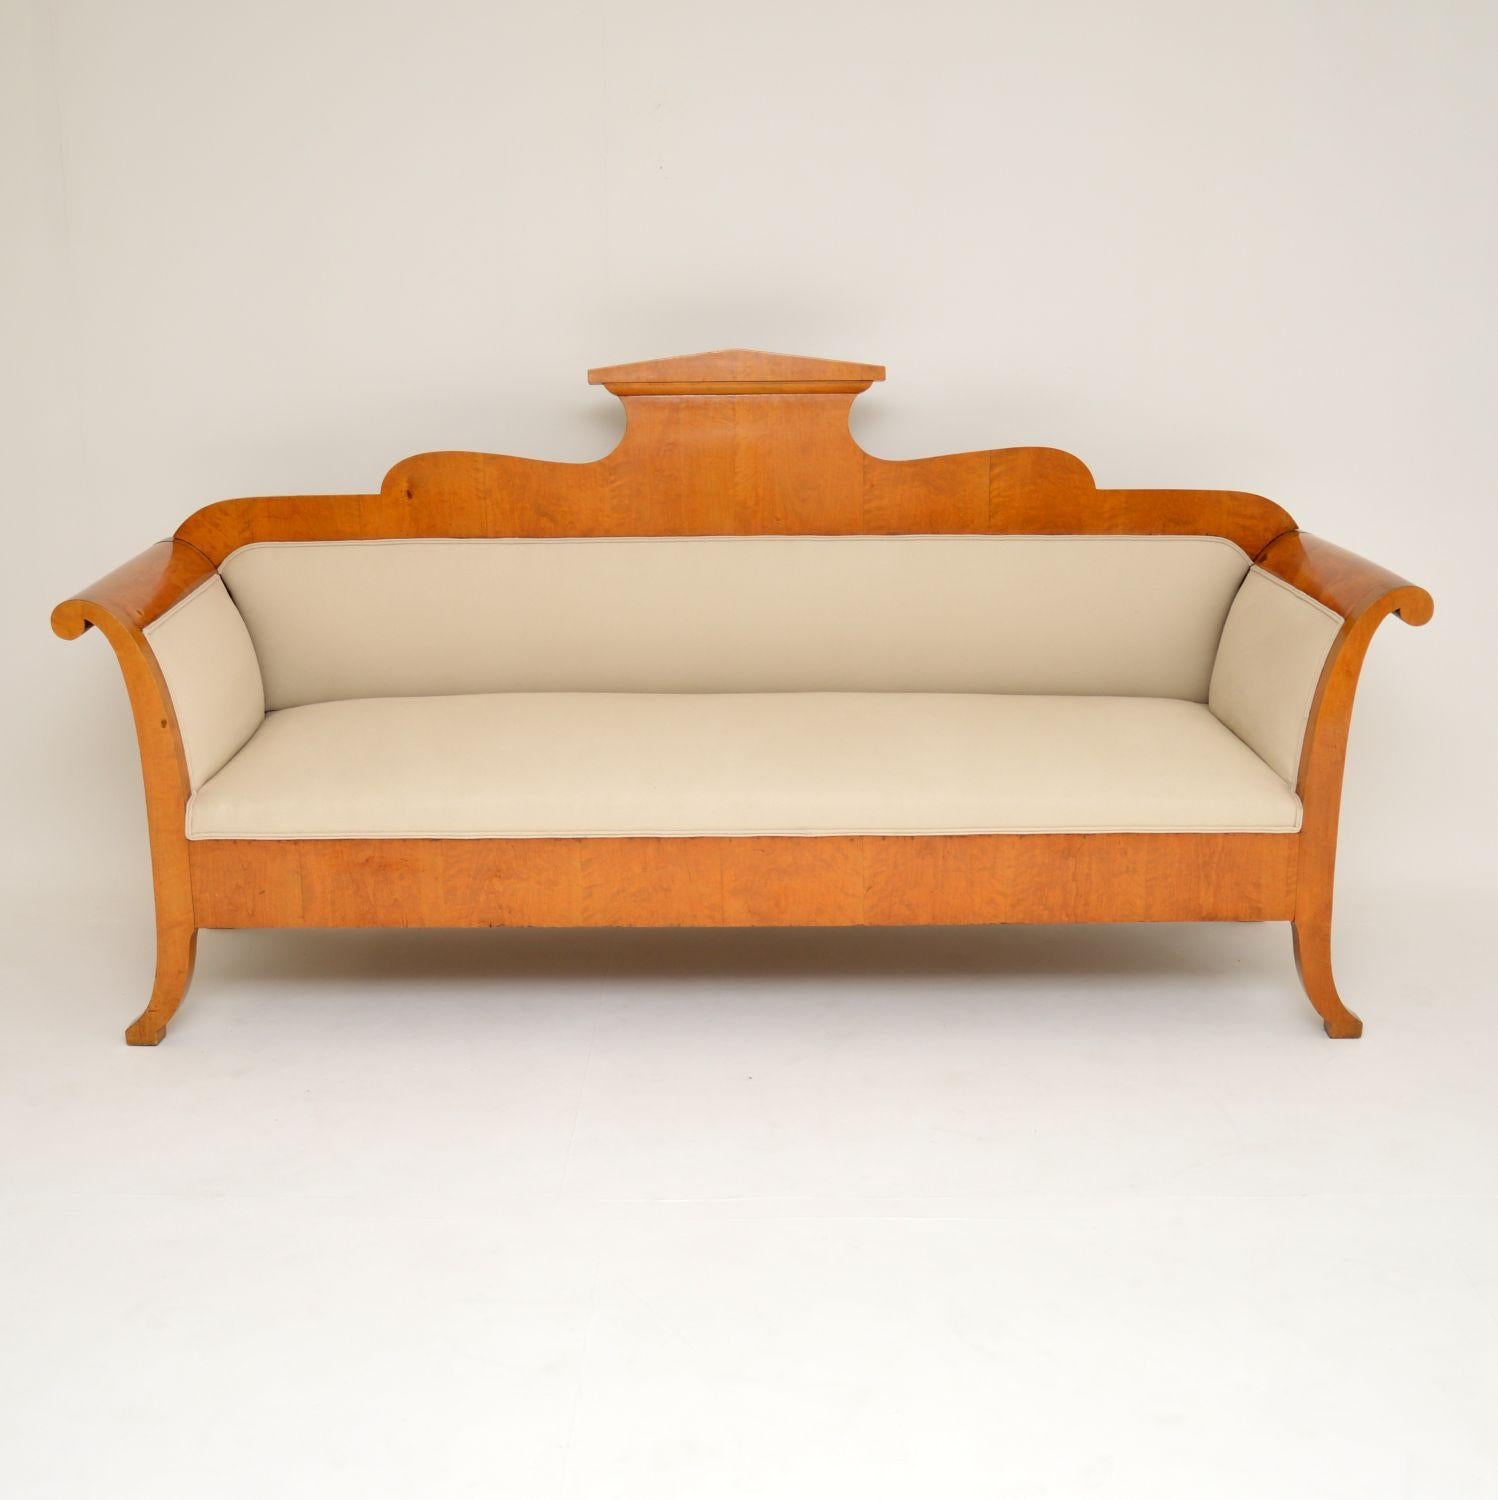 Large impressive antique Satin Birch Biedermeier sofa, which has just been re-upholstered in our regular natural cotton fabric. I would date it to circa 1850s period and it’s in excellent condition throughout.

This sofa has just come over from